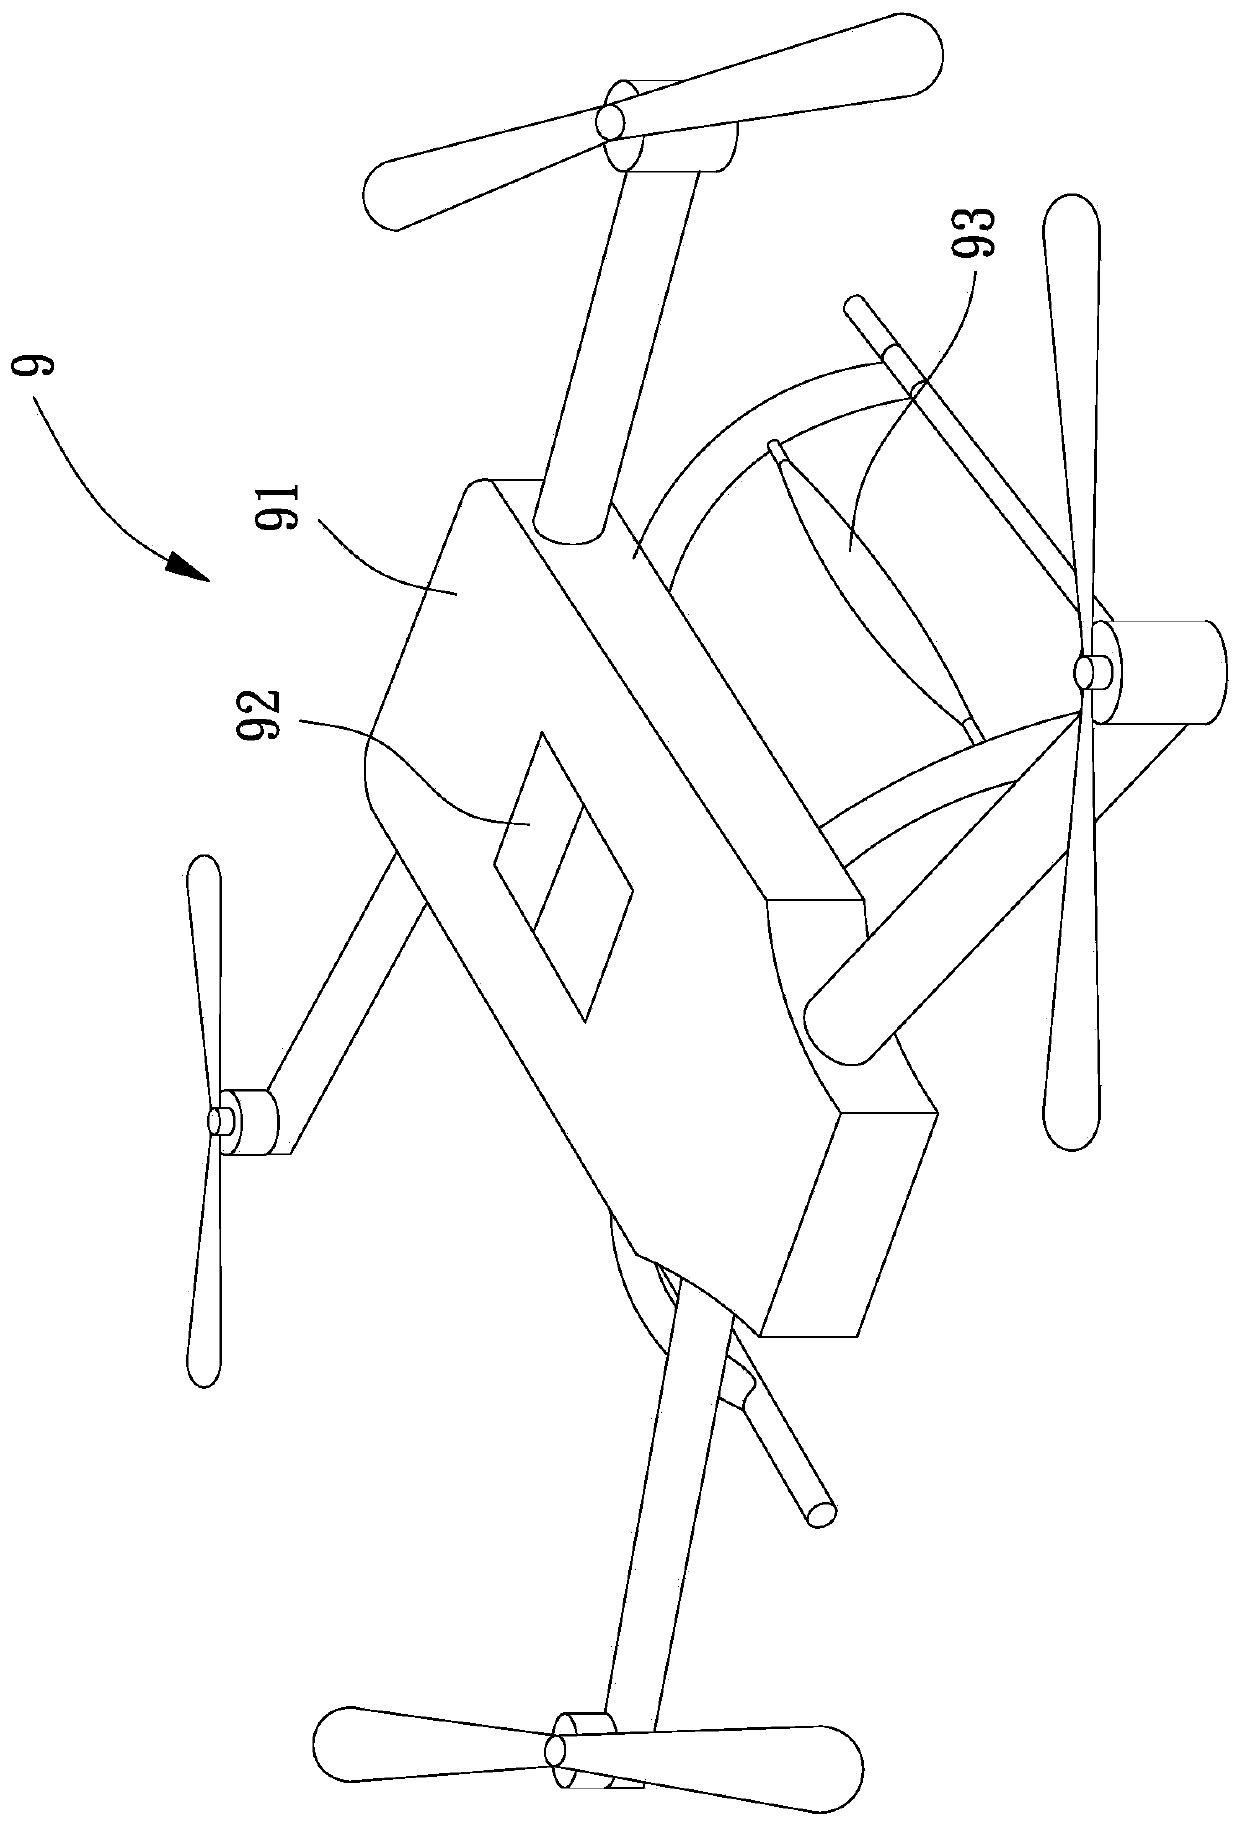 Aircraft with slow descending mechanisms